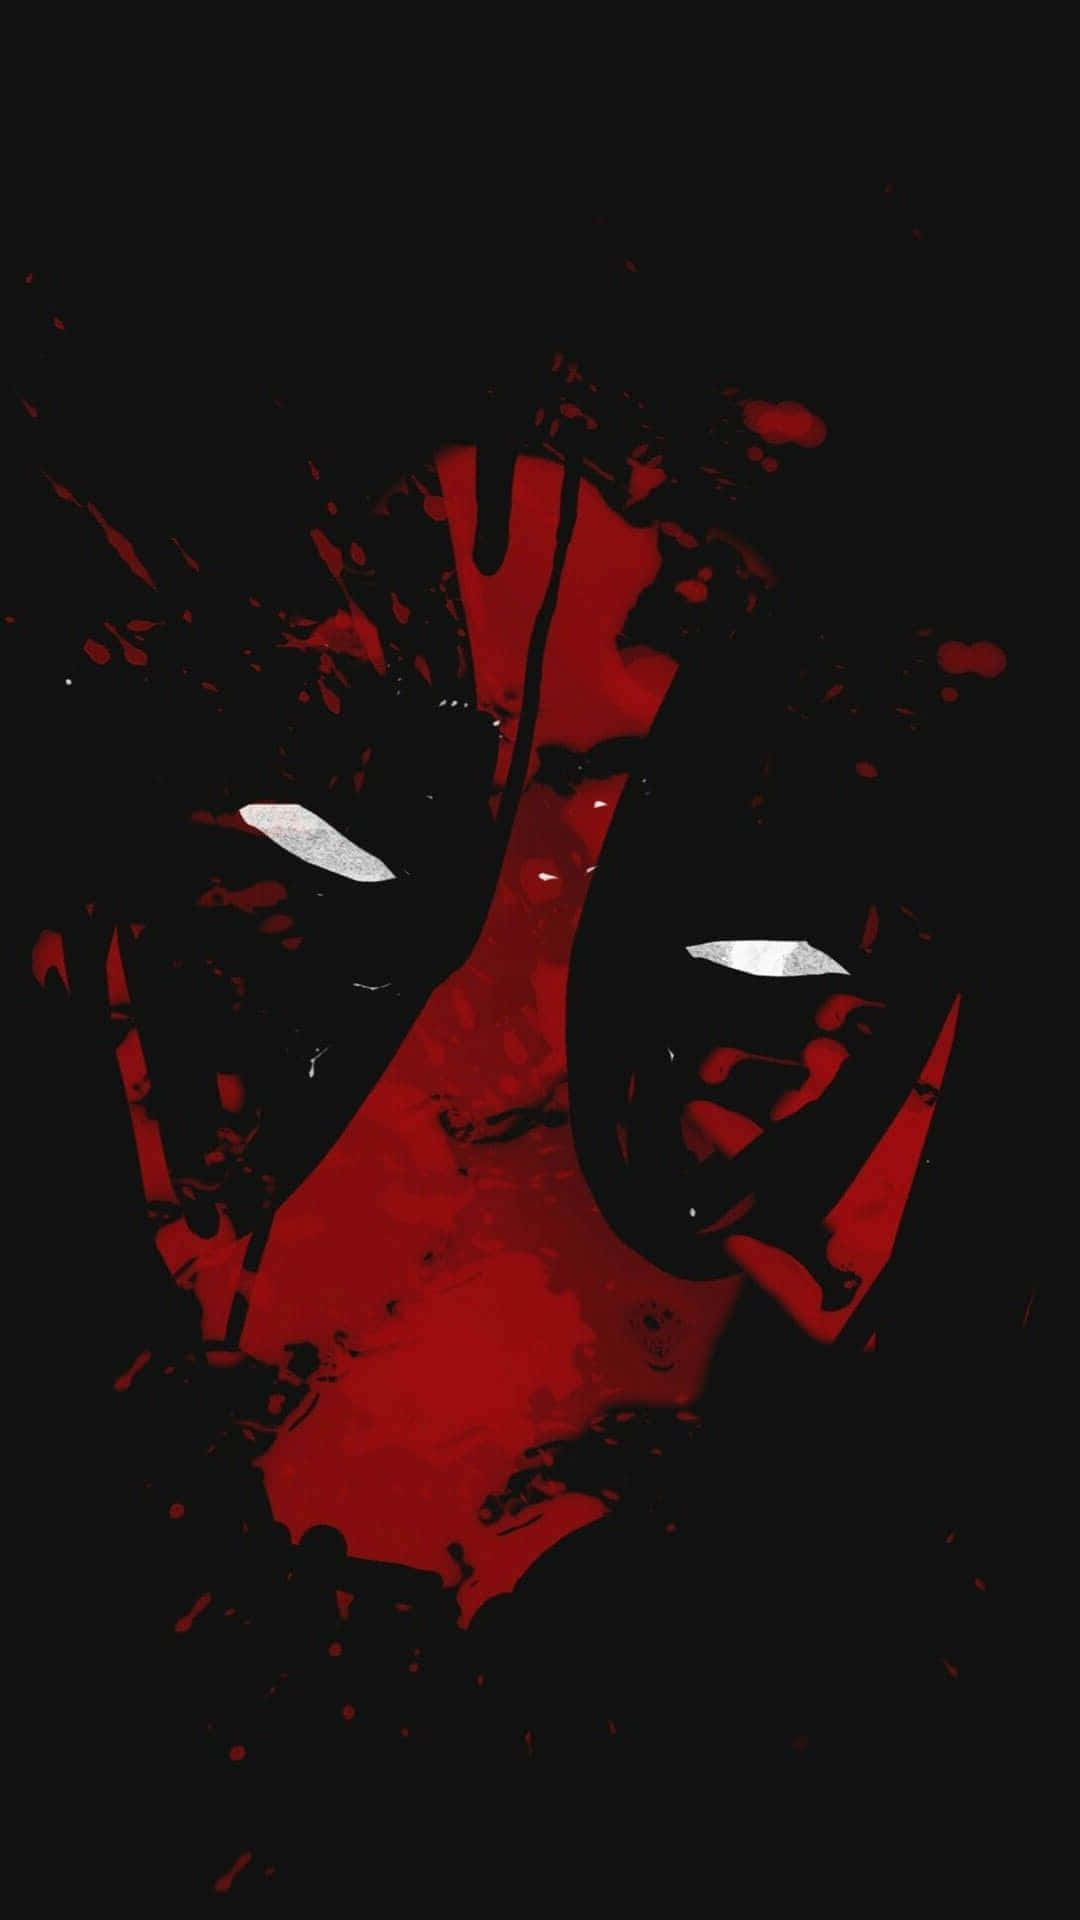 Step up your style with the Deadpool Iphone Wallpaper